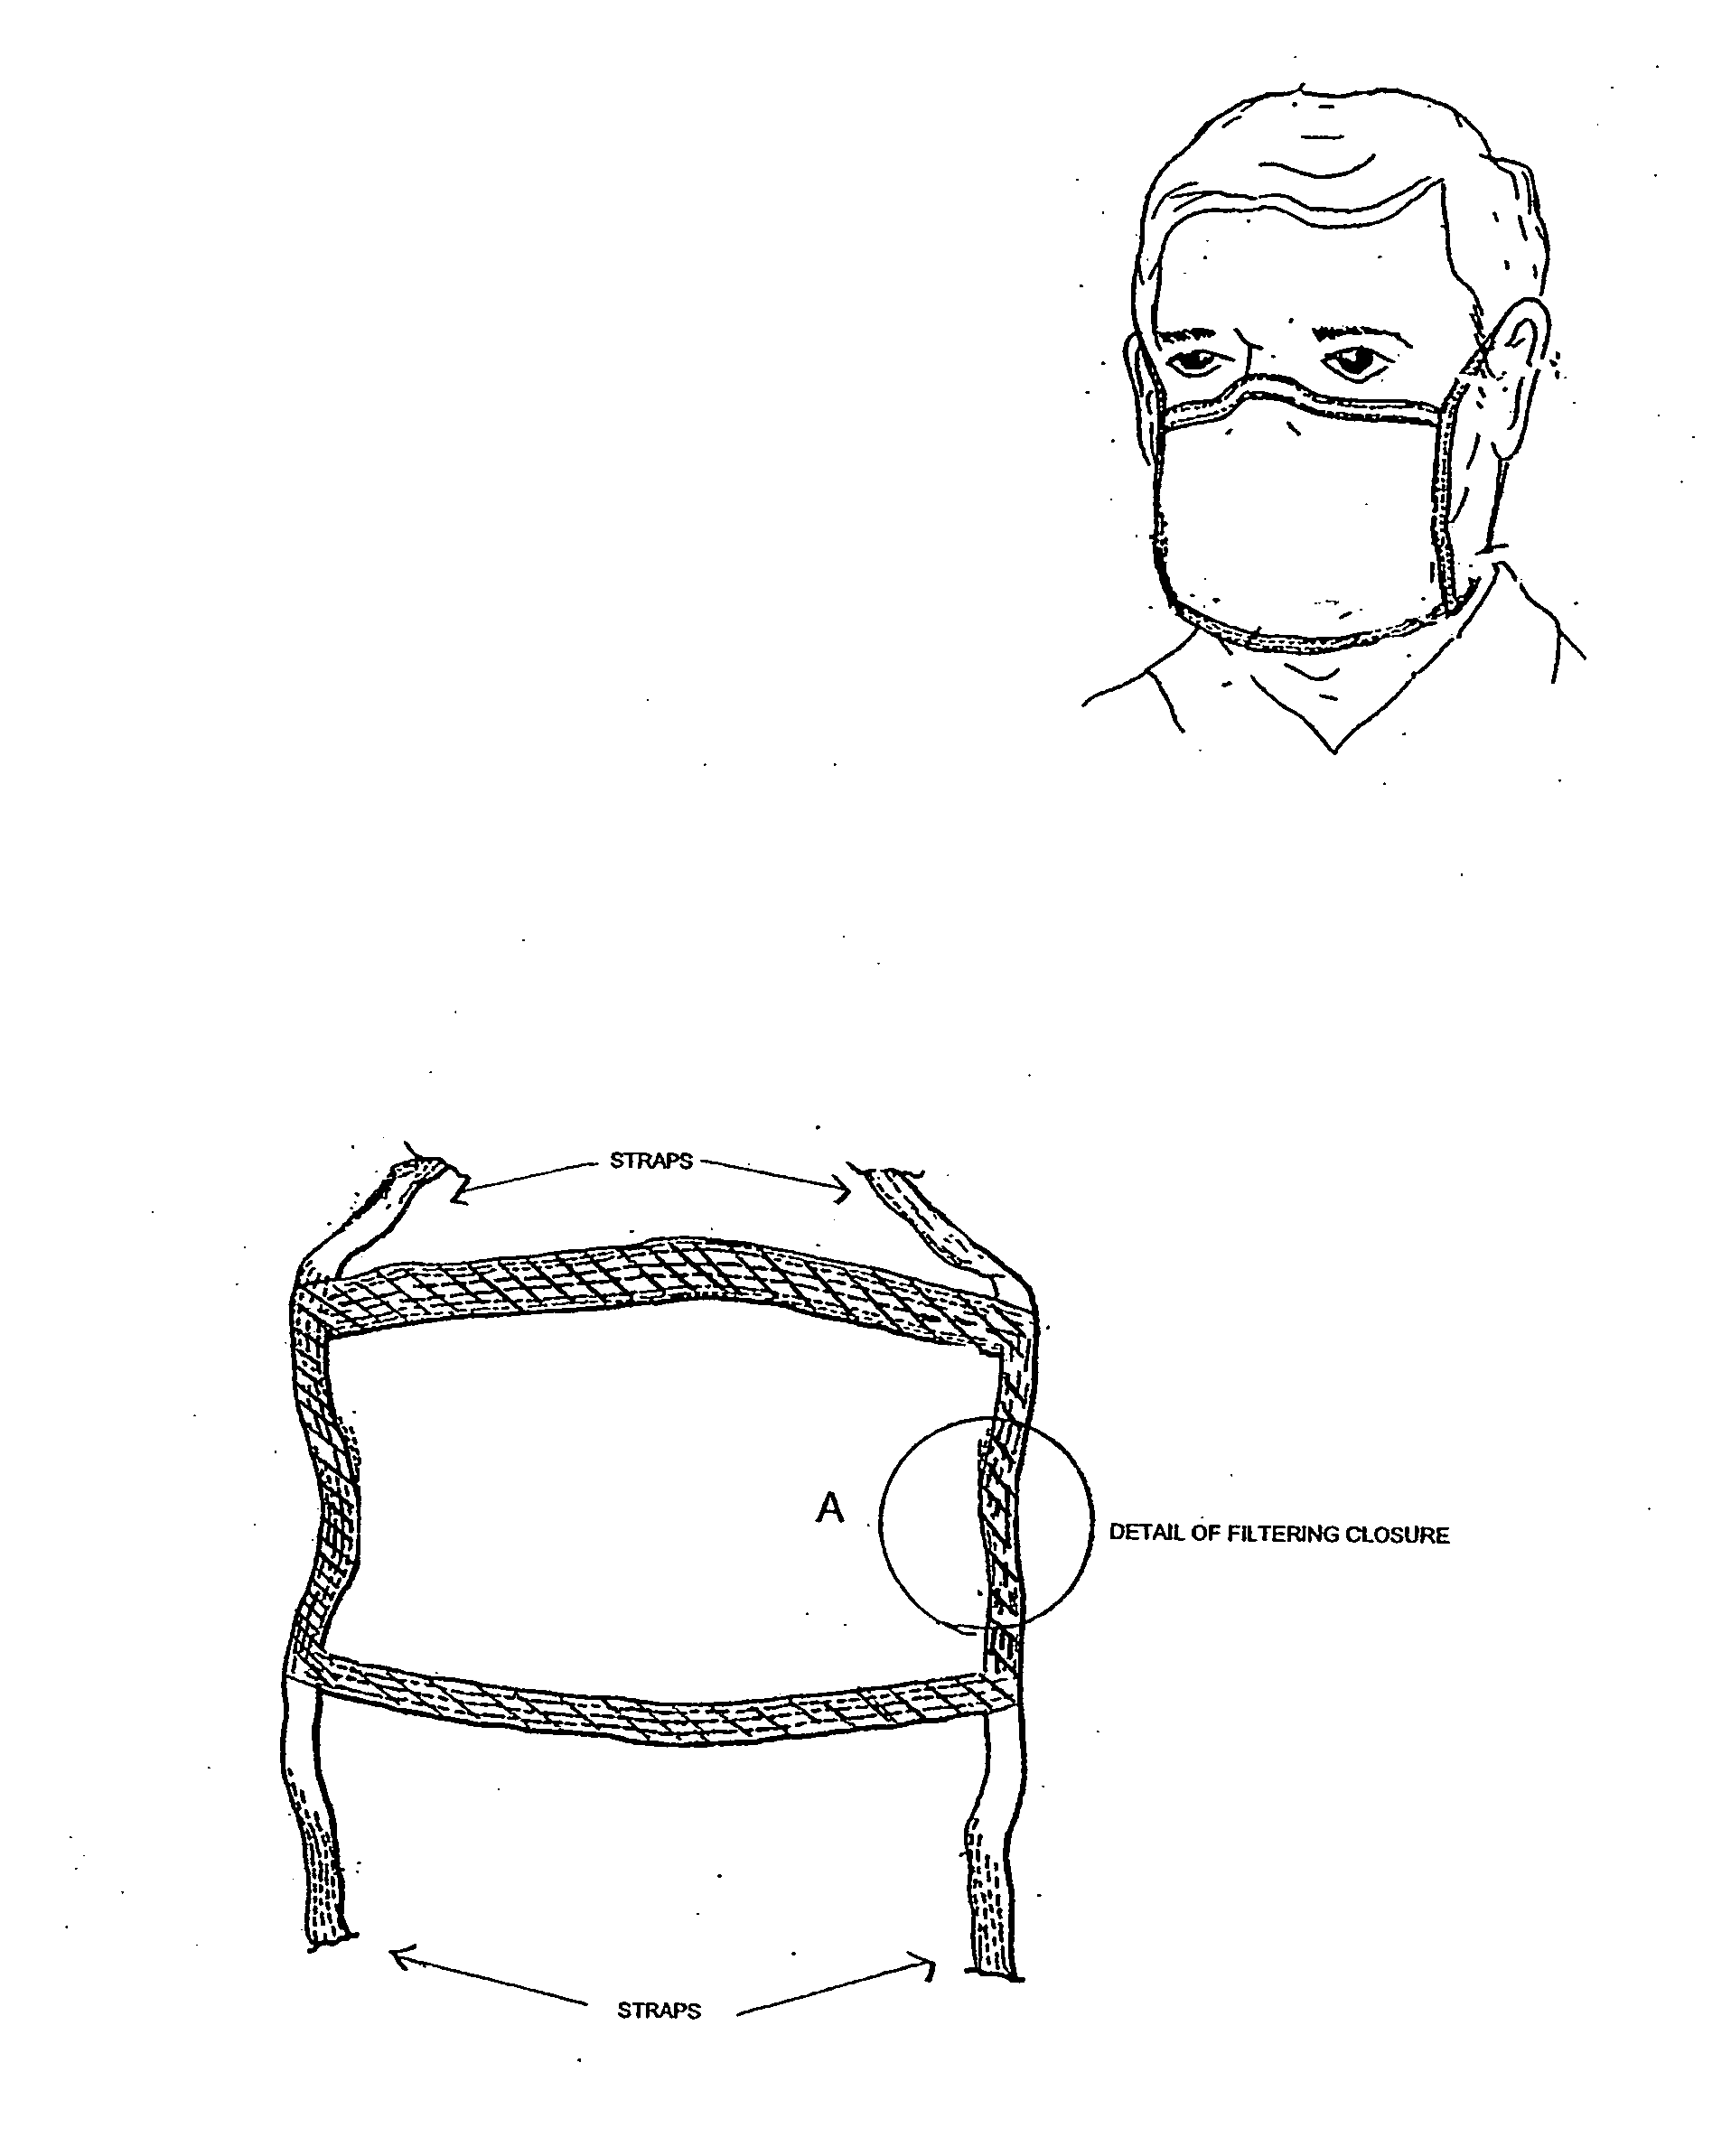 Facemask with filtering closure